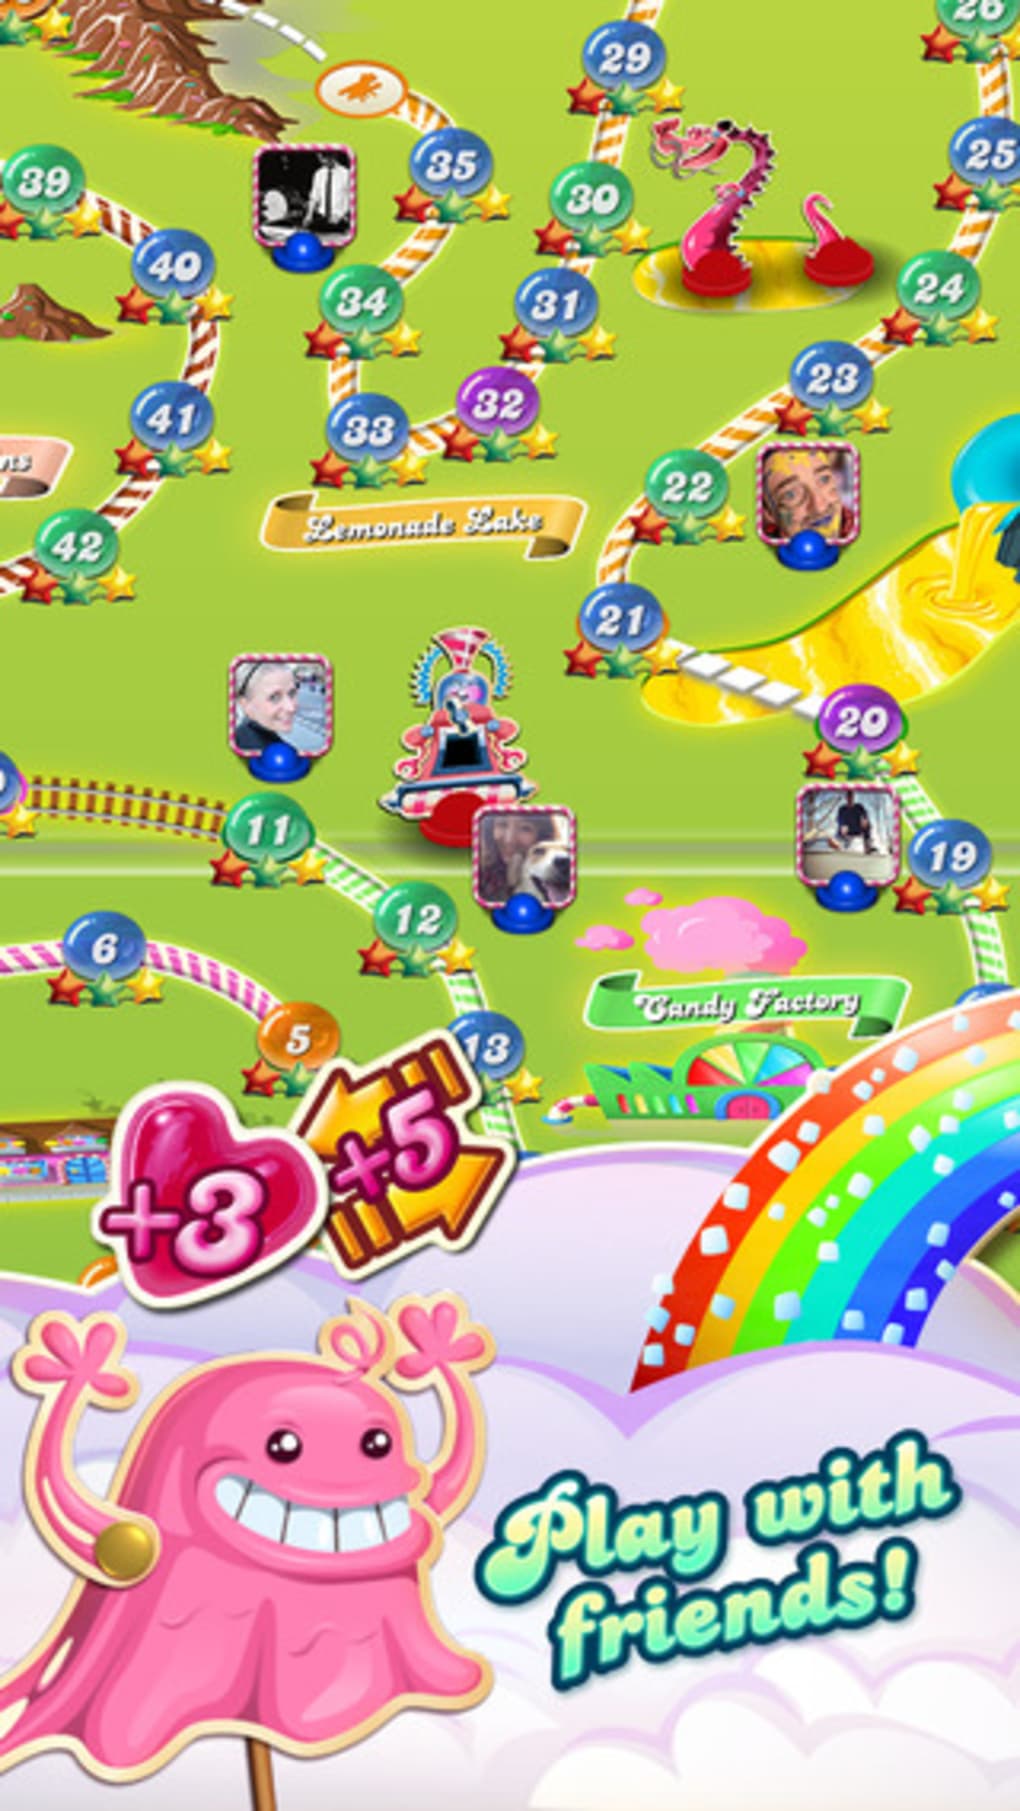 Candy Crush Saga 1.265 iOS - Free download for iPhone